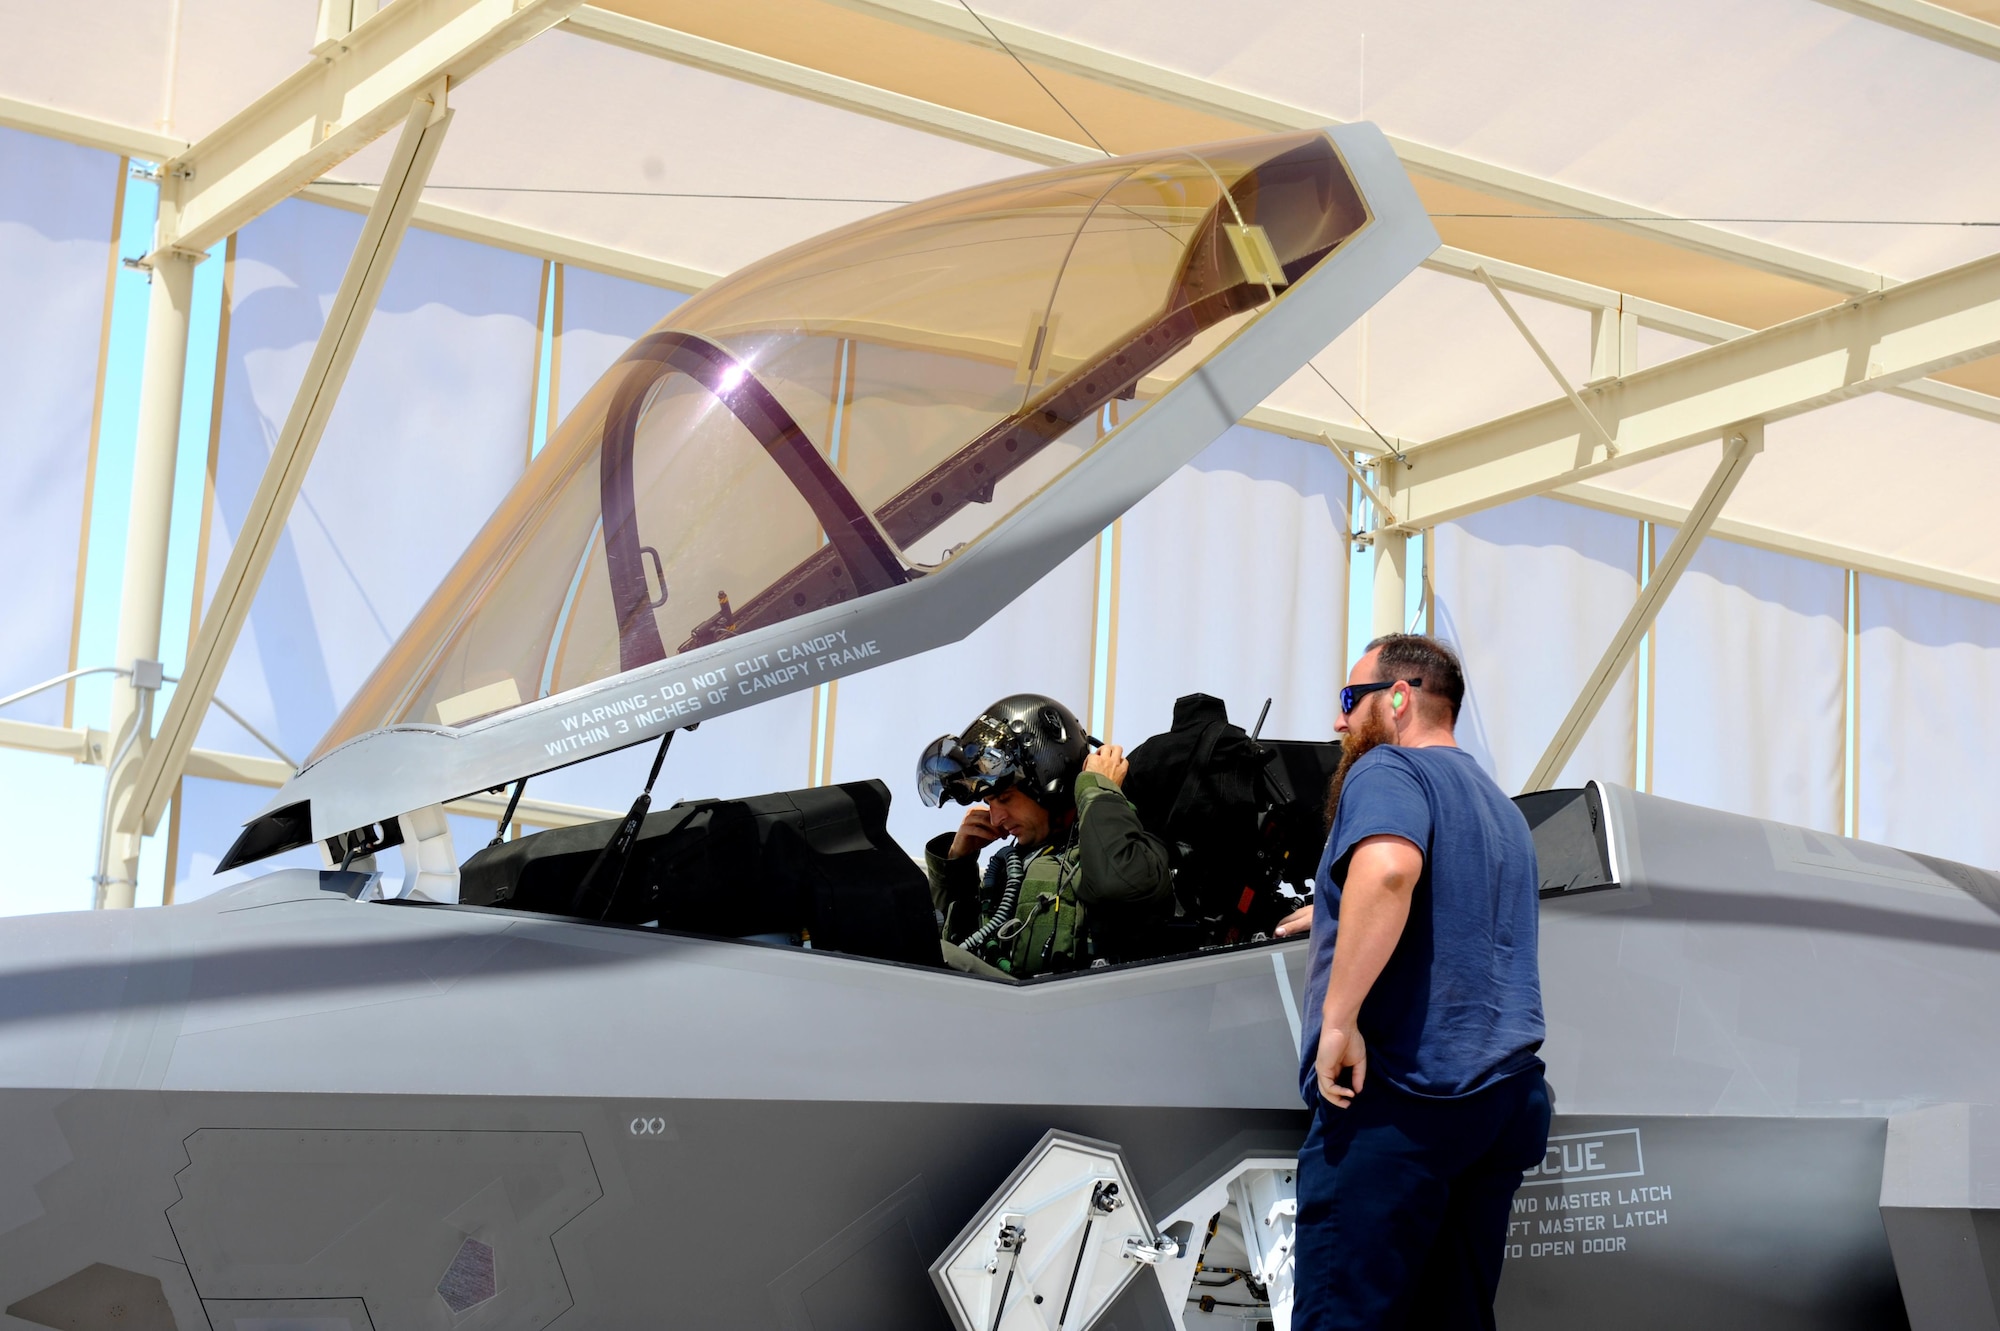 Lt. Col. Gregory Frana, 62nd Fighter Squadron commander, prepares to remove his helmet May 19, 2016, at Luke Air Force Base after flying Luke's 5000th F-35 sortie. Paul Linski, 62nd Aircraft Maintenance Unit Lockheed Martin
crew chief, stands by to assist Frana in safely removing his gear and exiting the jet. (U.S. Air Force photo by Airman 1st Class Pedro Mota)